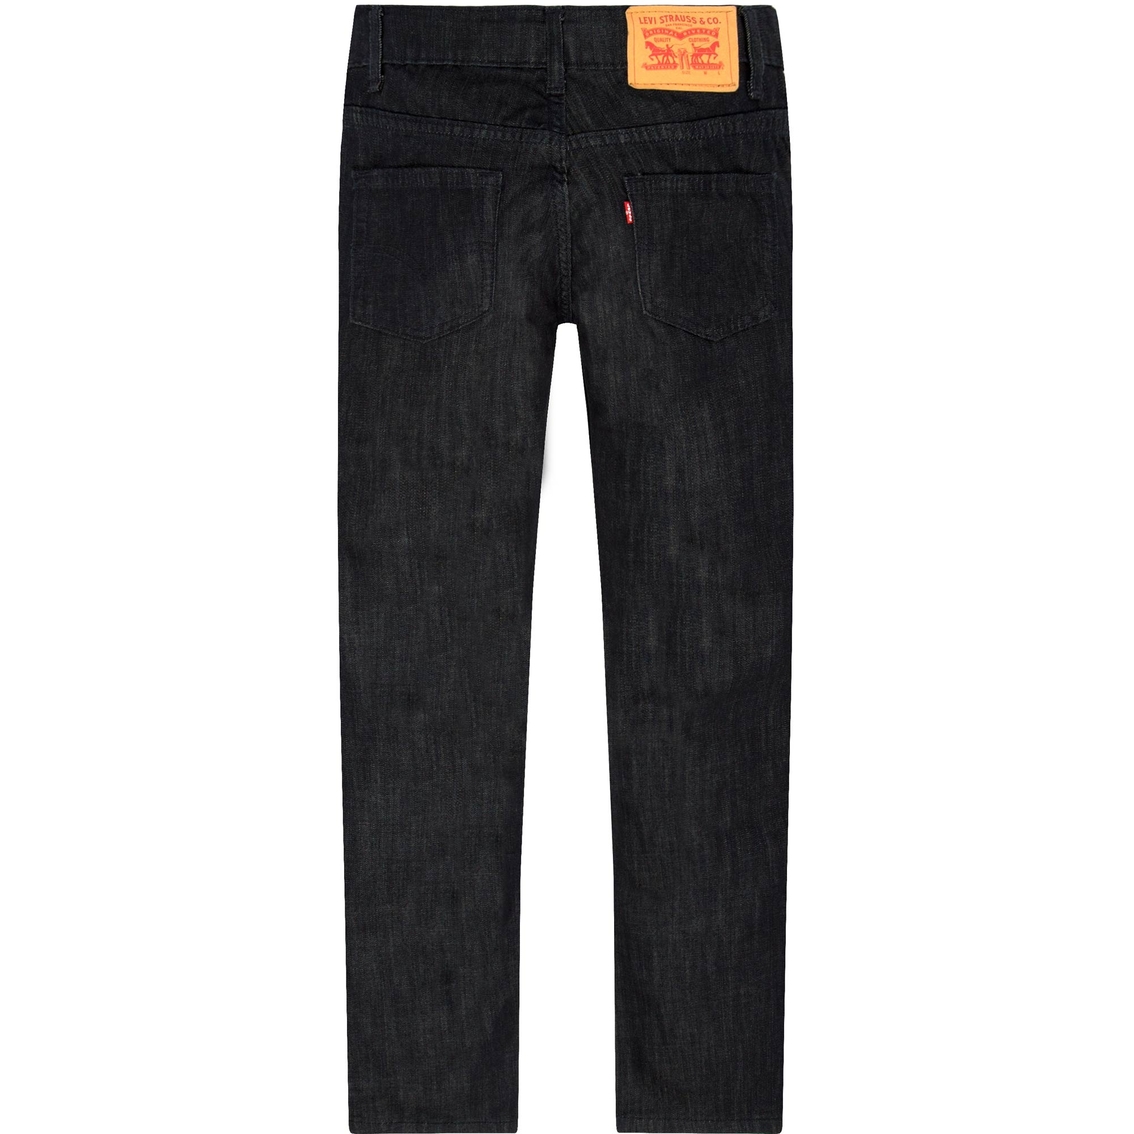 Levi's Boys 541 Athletic Fit Jeans | Boys 8-20 | Clothing & Accessories ...